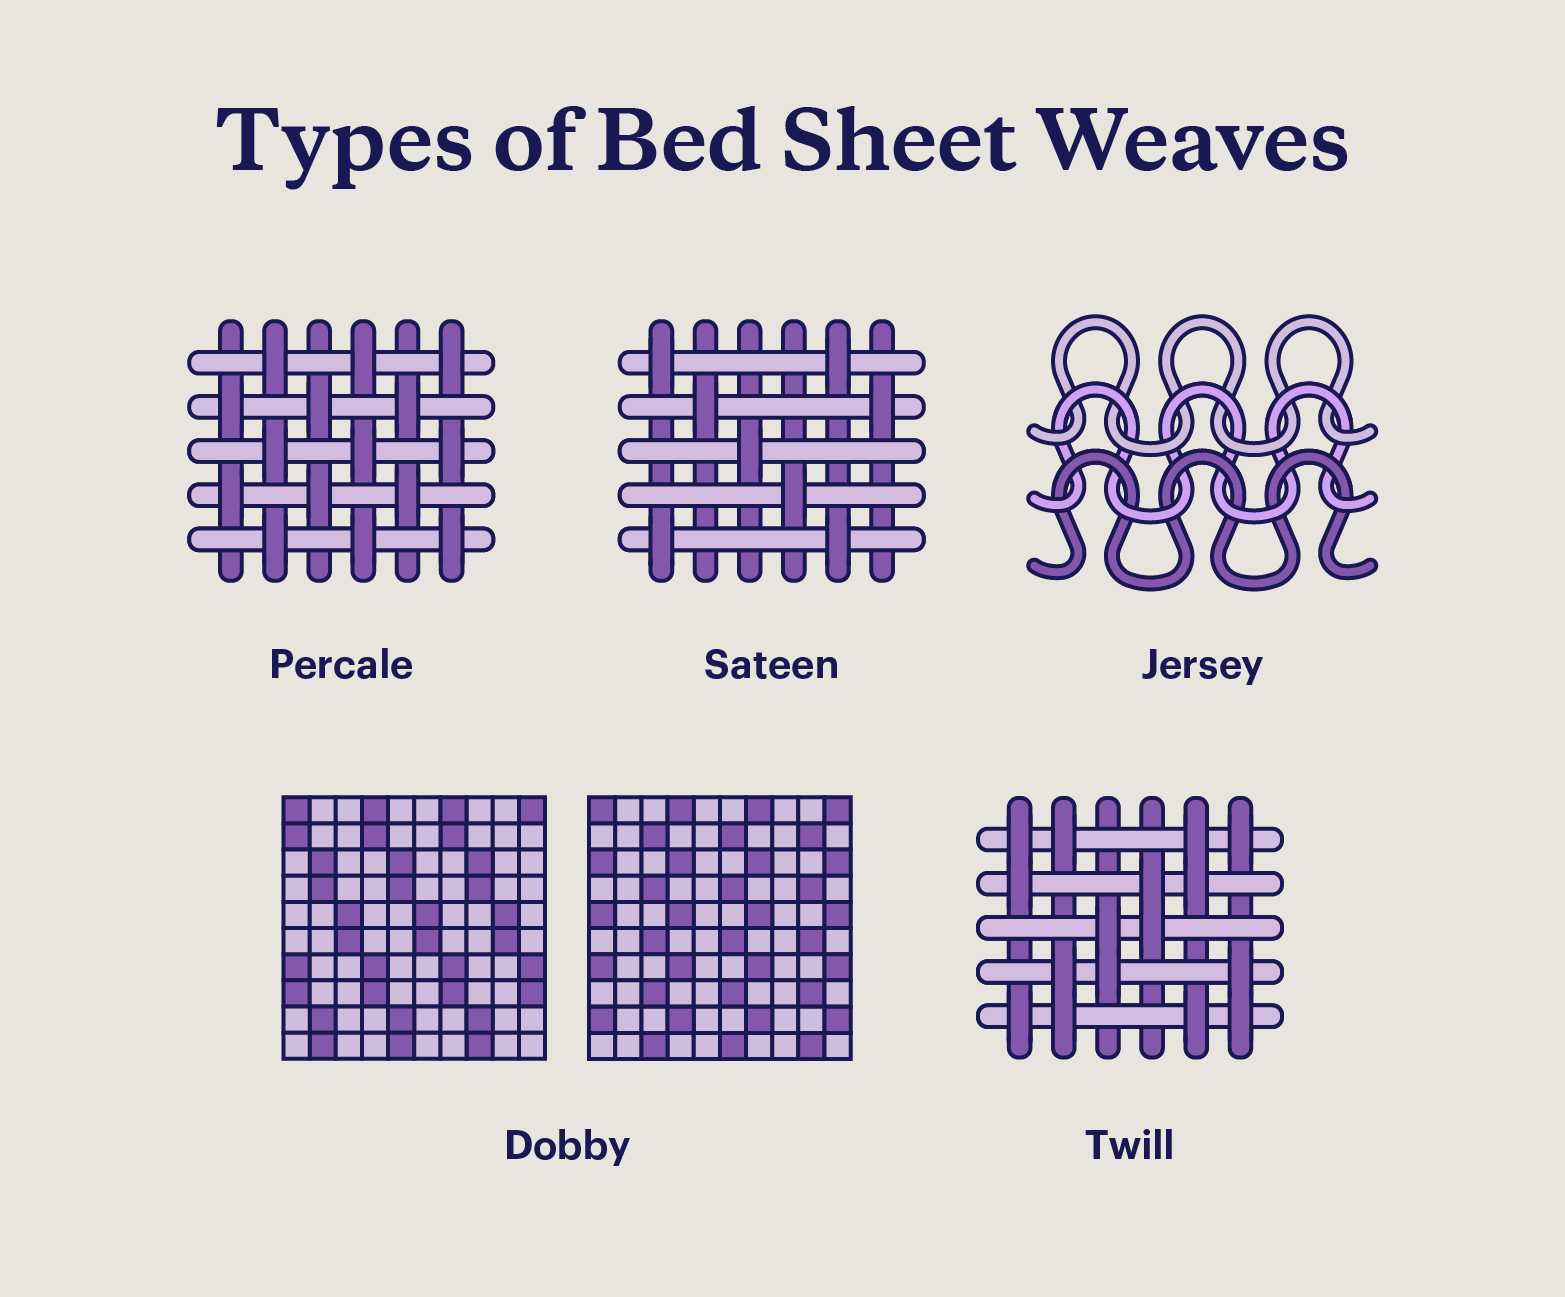 Illustrations of different types of sheet weaves, including percale, sateen, jersey, dobby, and twill.